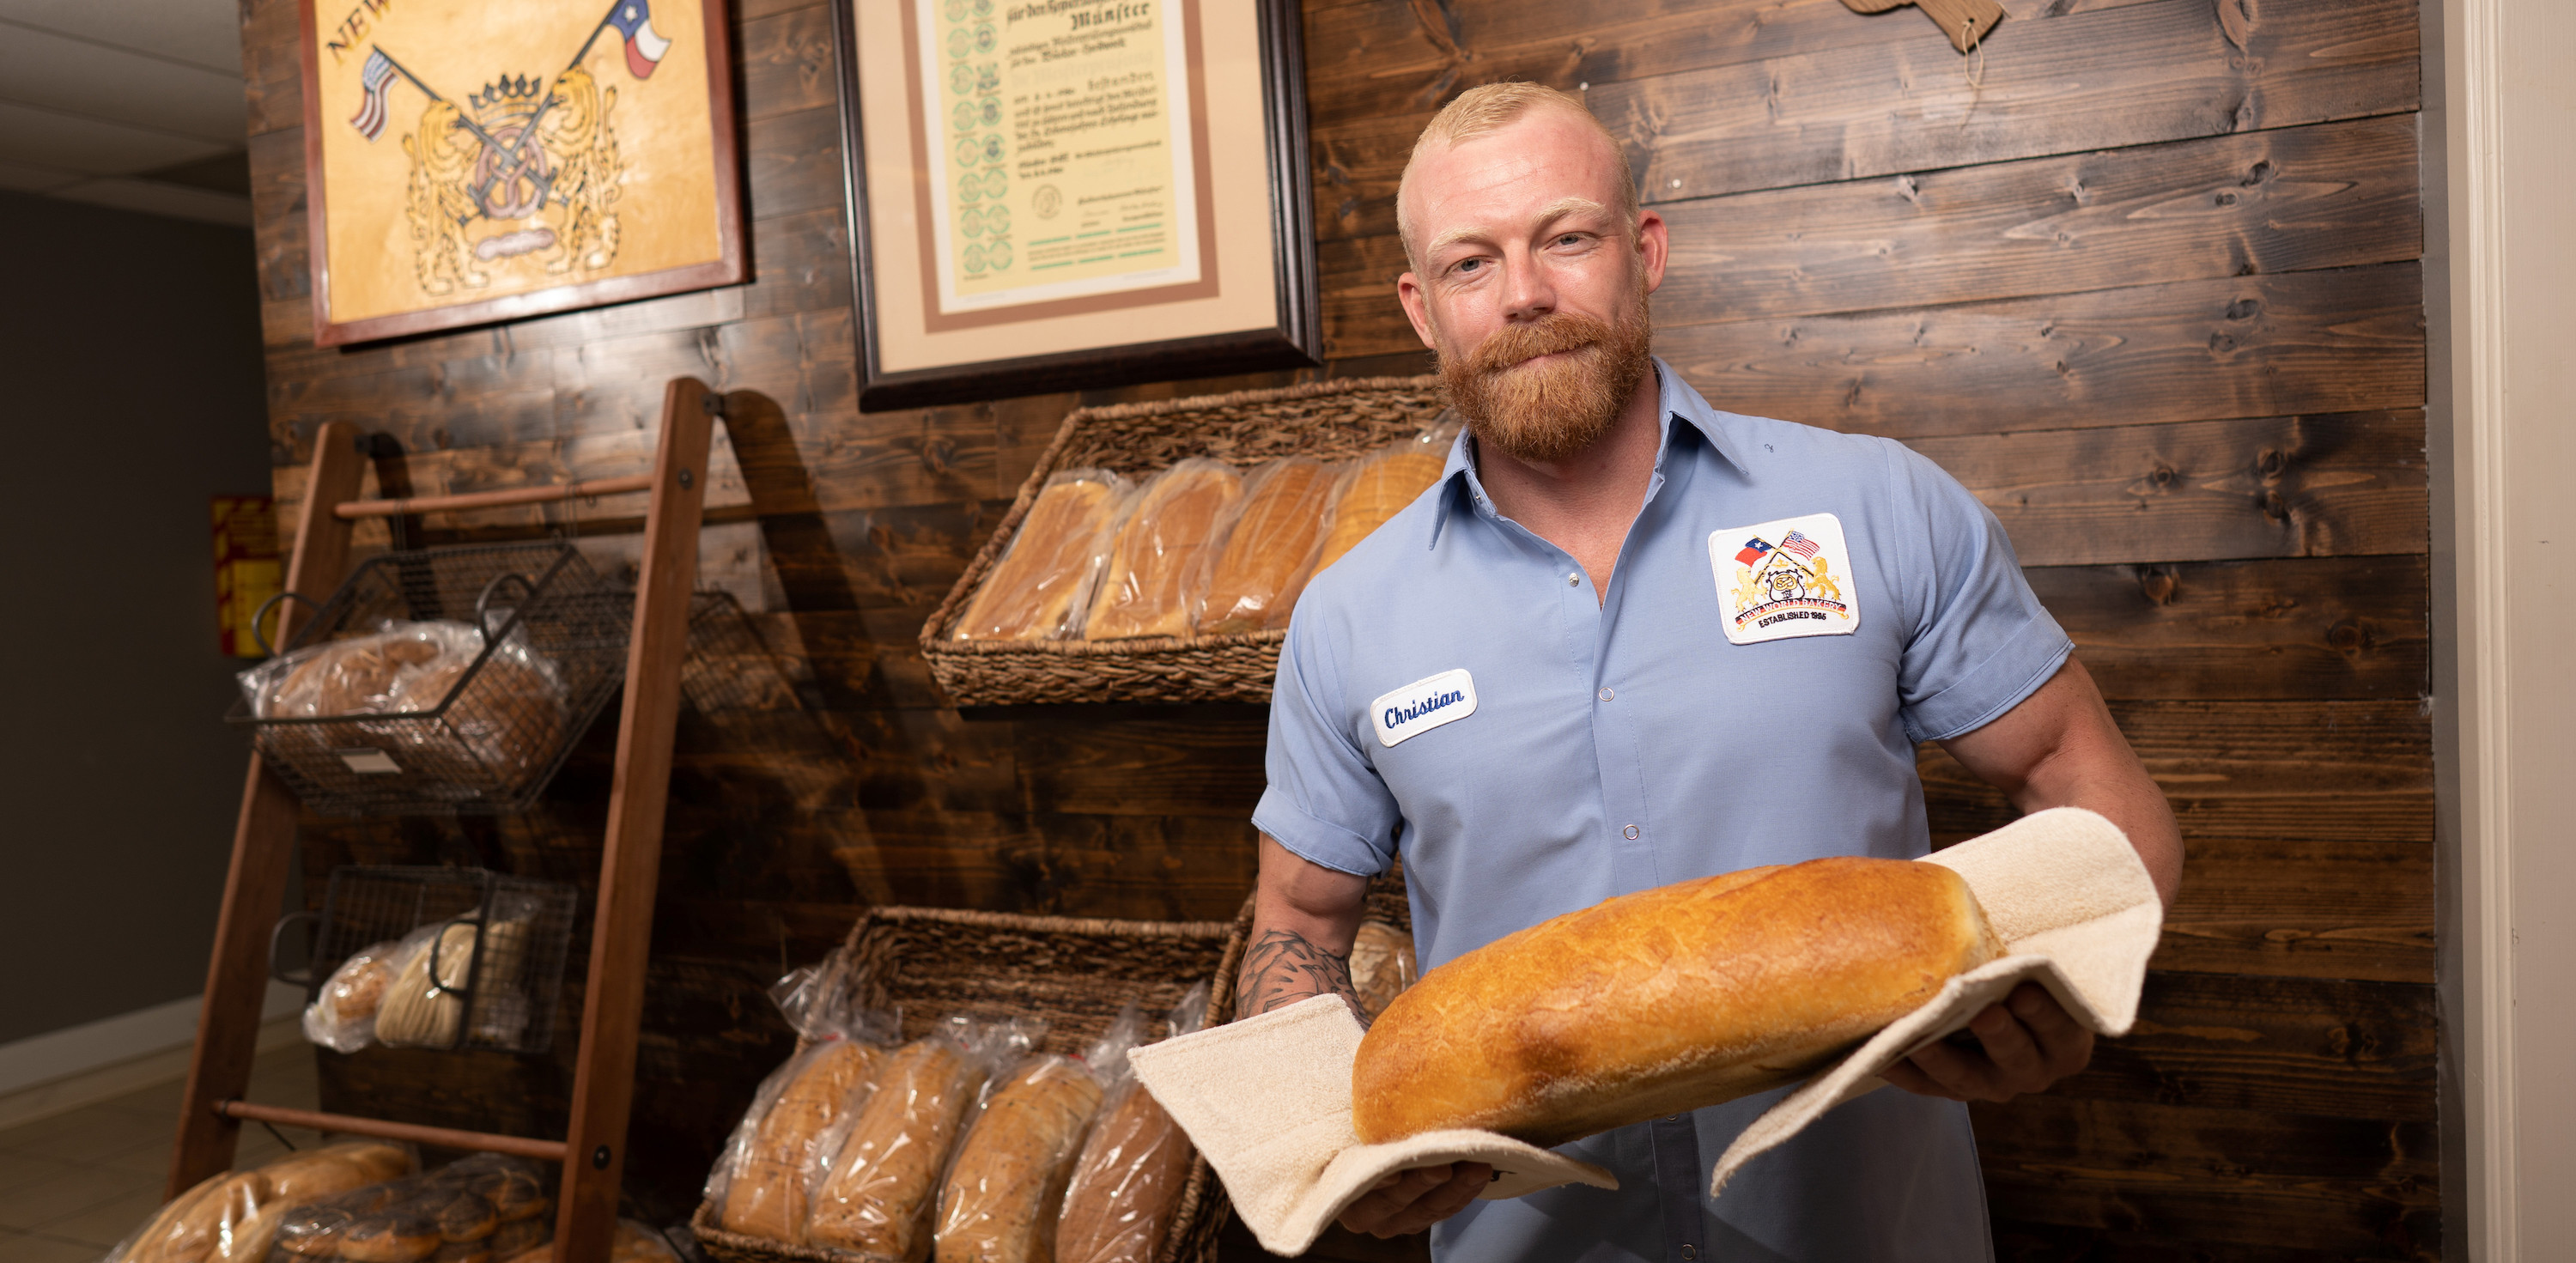 New world bakery employee showing off a freshly baked piece of bread